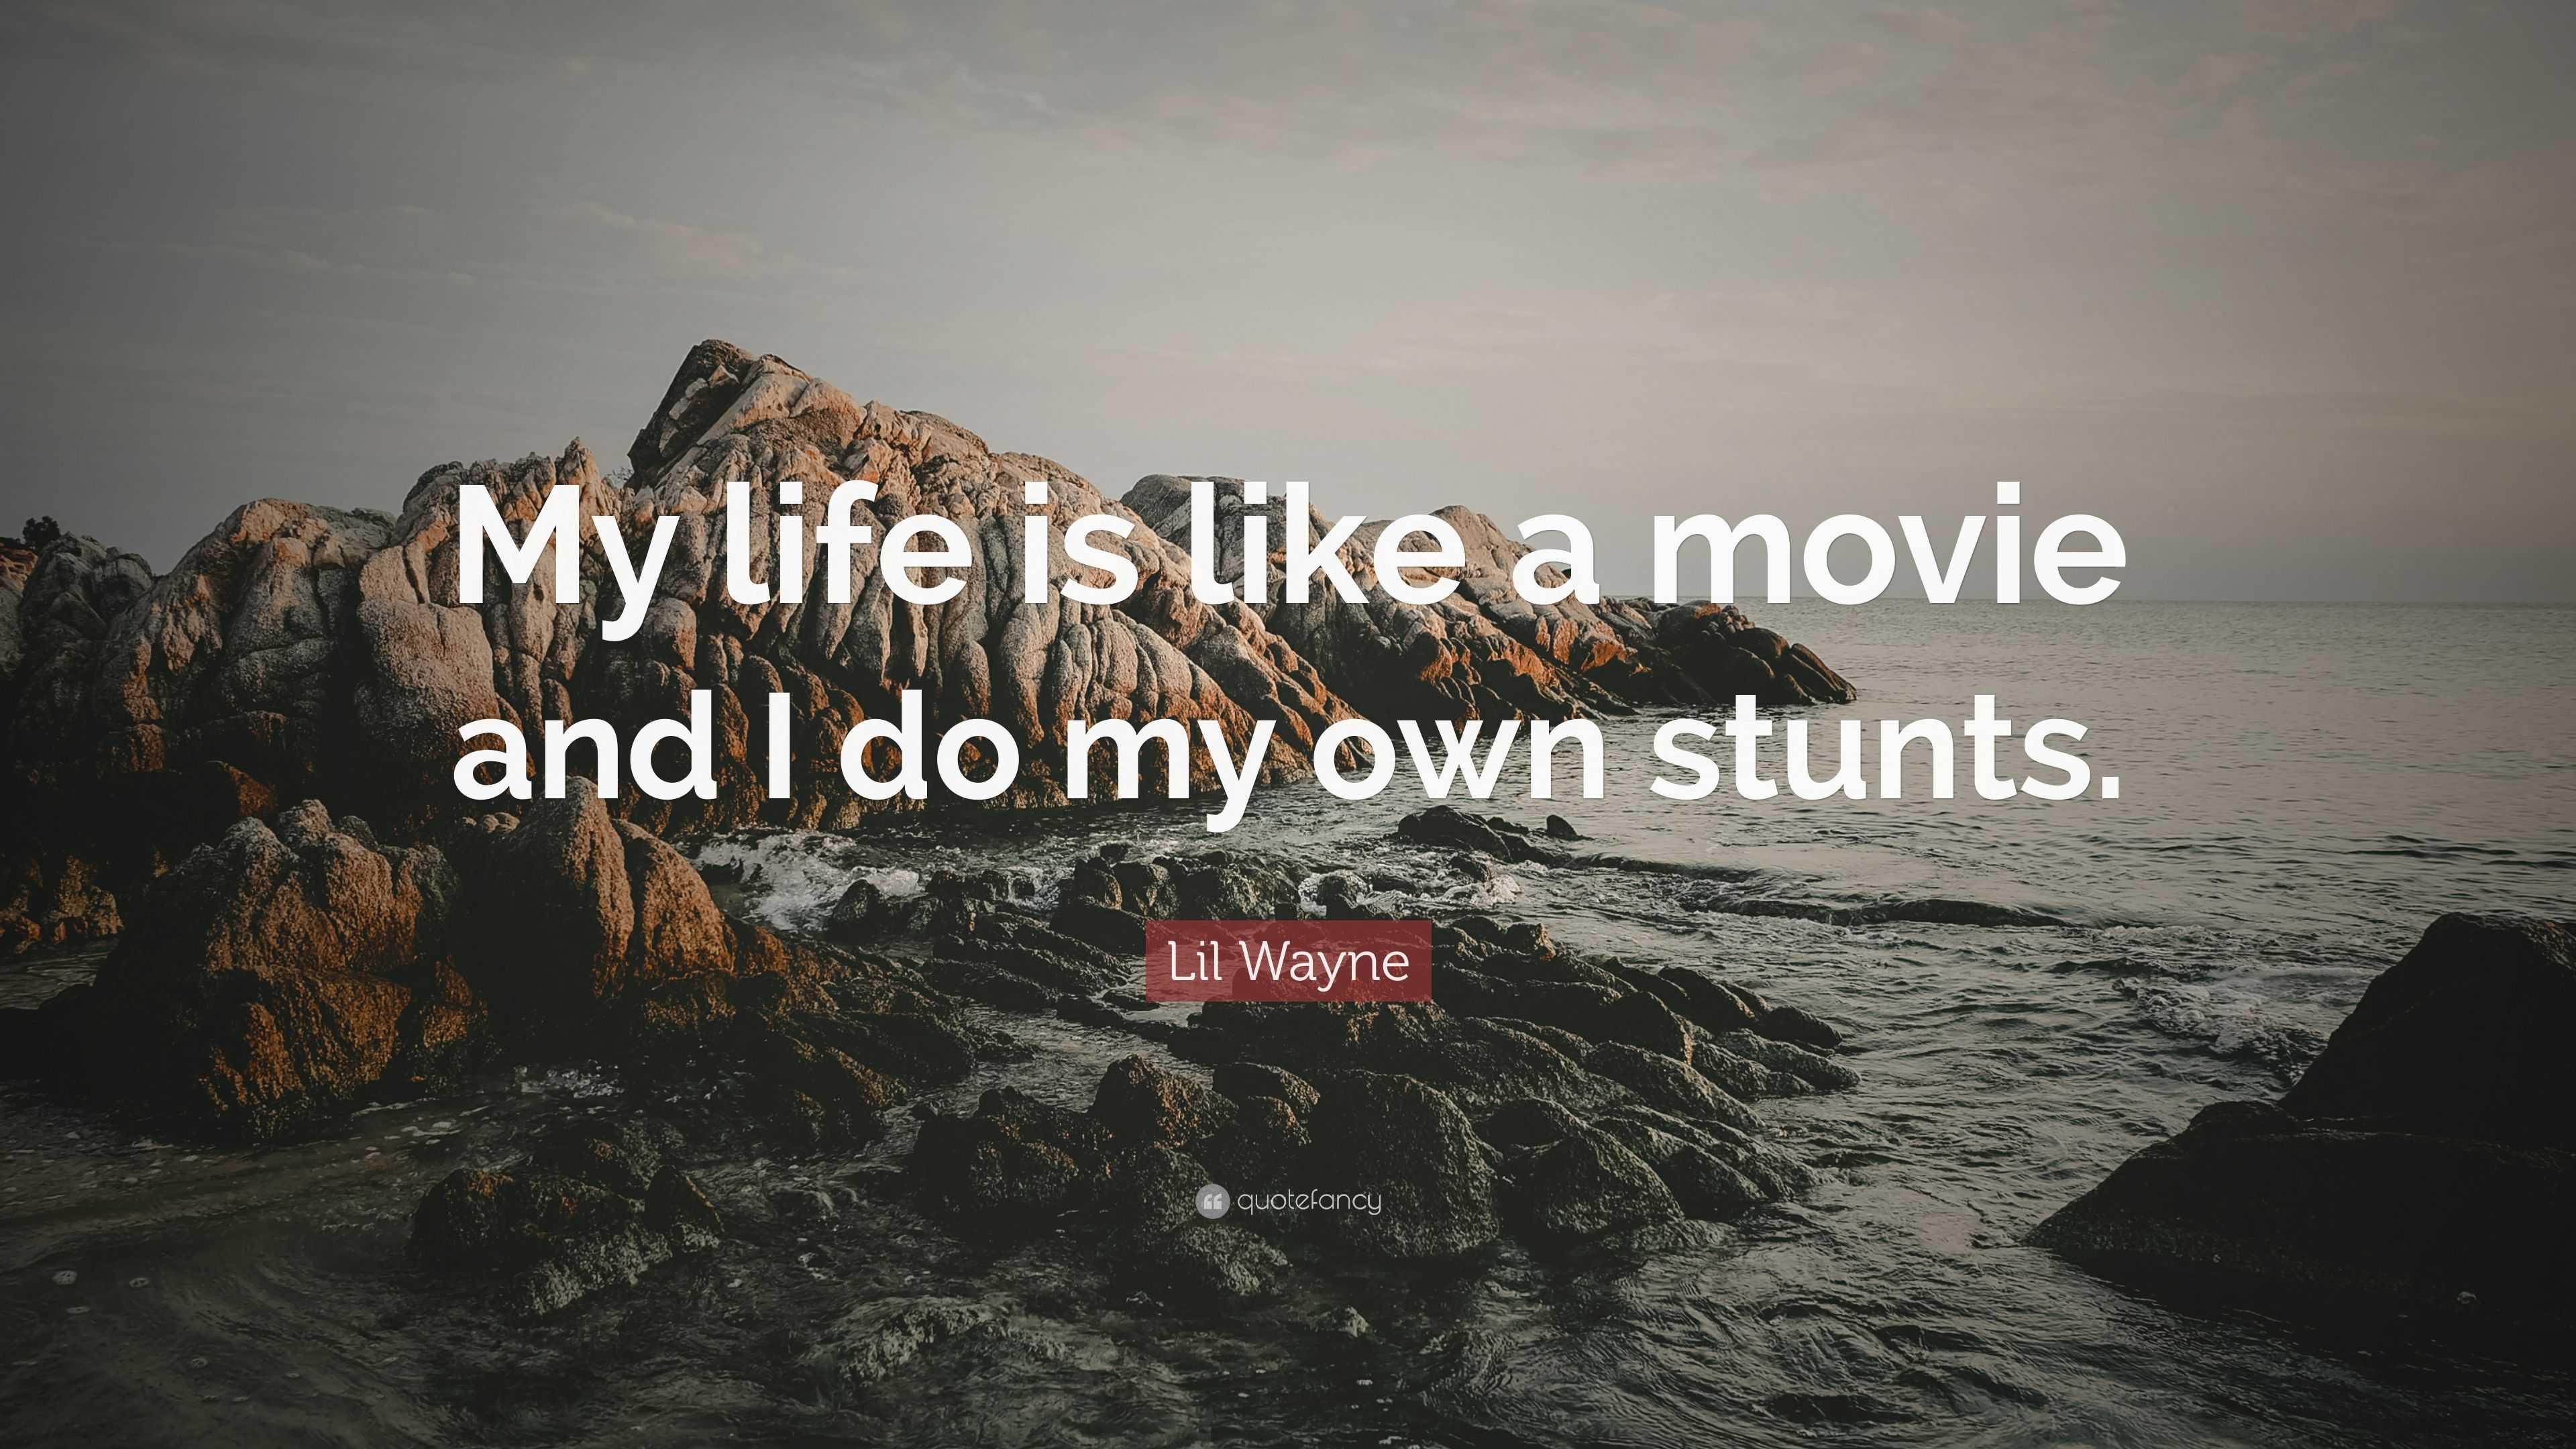 Lil Wayne Quote “My life is like a movie and I do my own